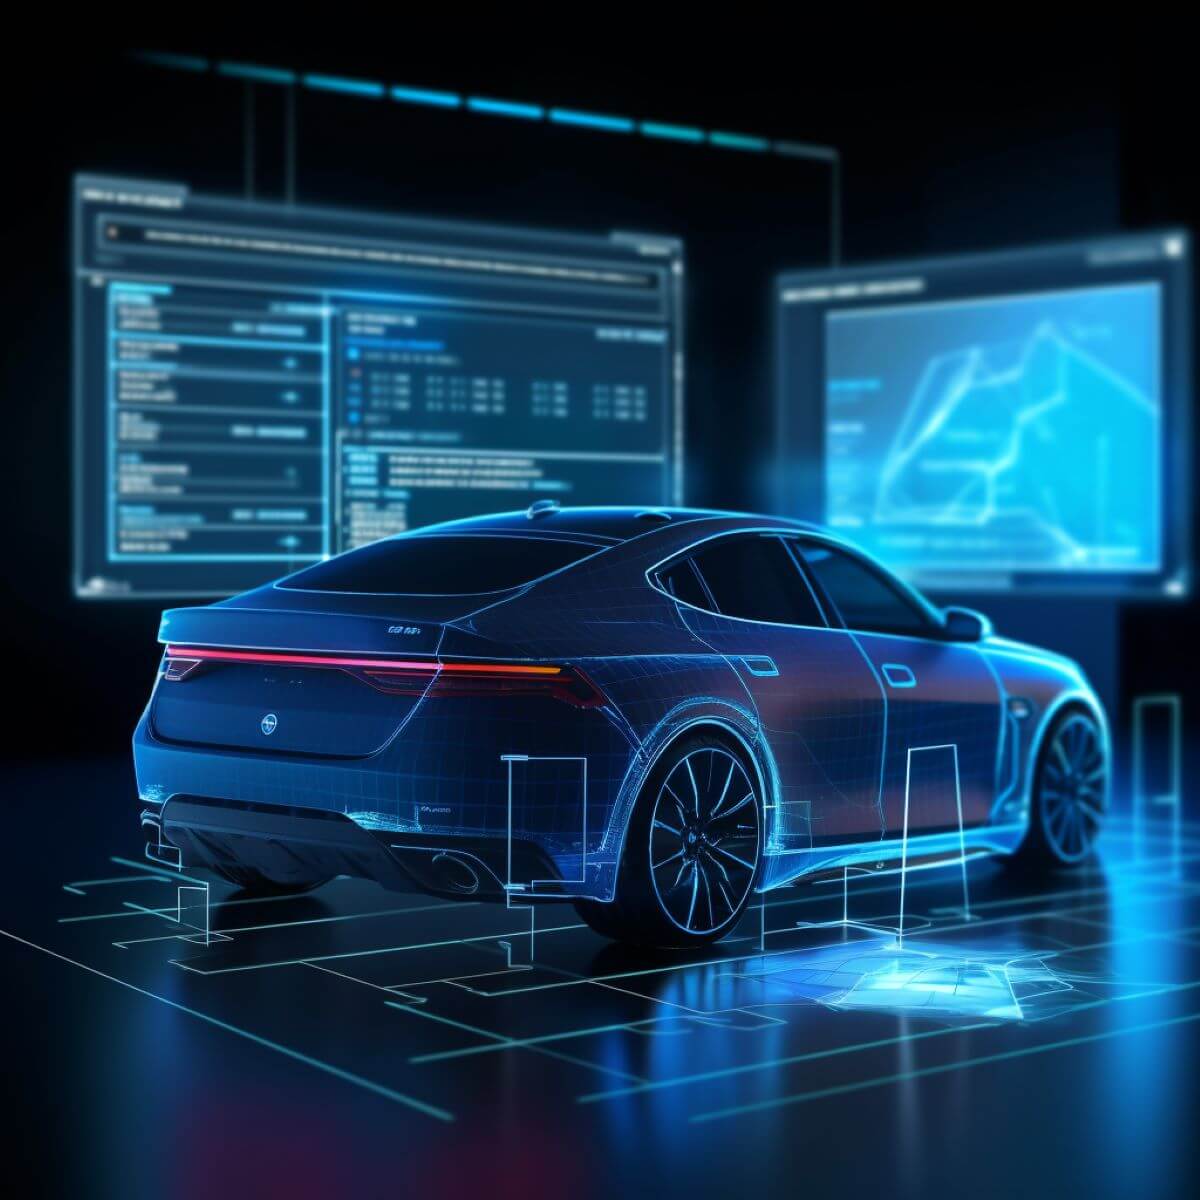 A futuristic car is showcased alongside a computer screen showing data science in car industry